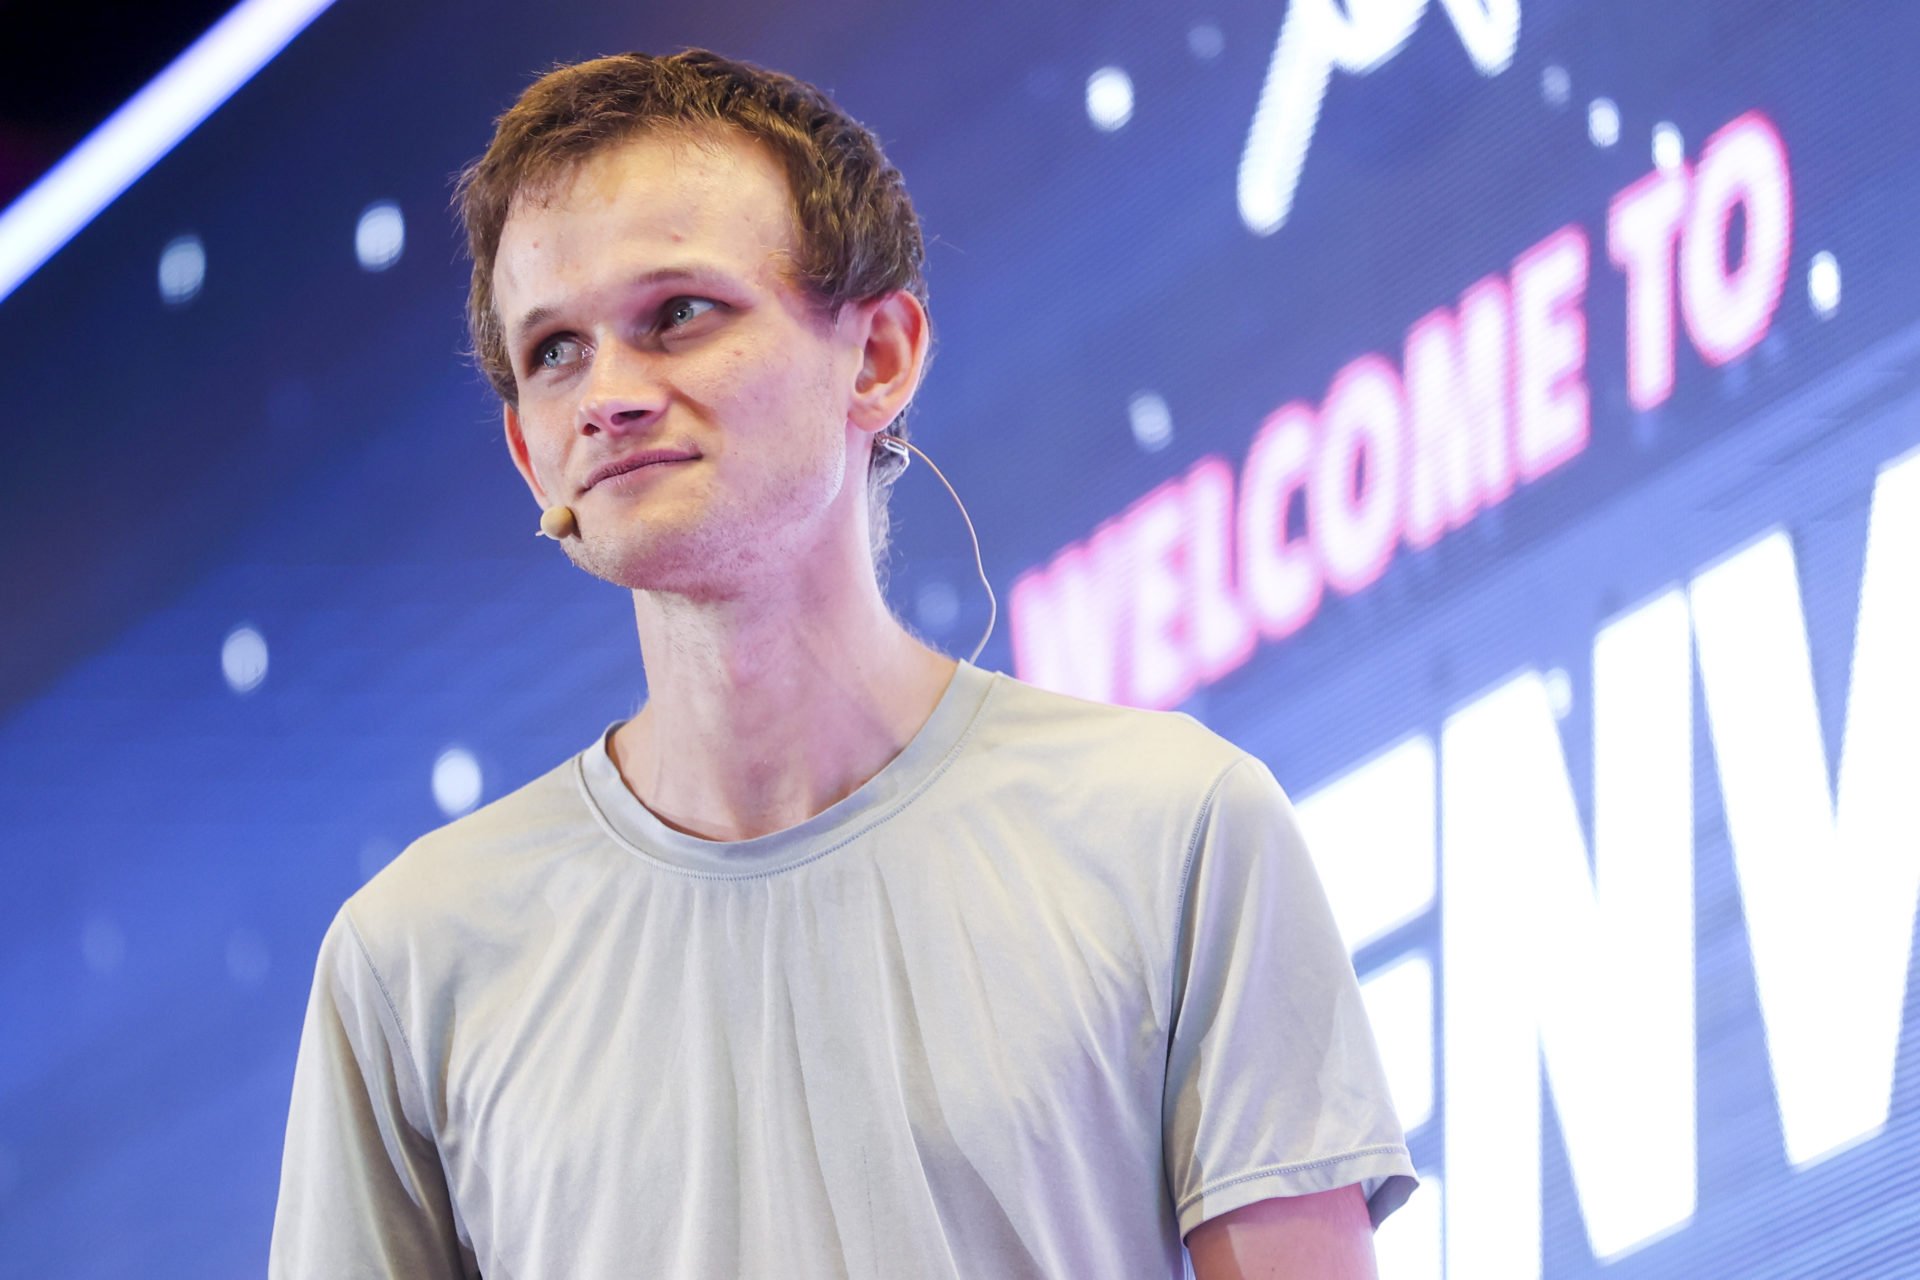 Vitalik Buterin proves it’s not just Ethereum on the rise in viral photo